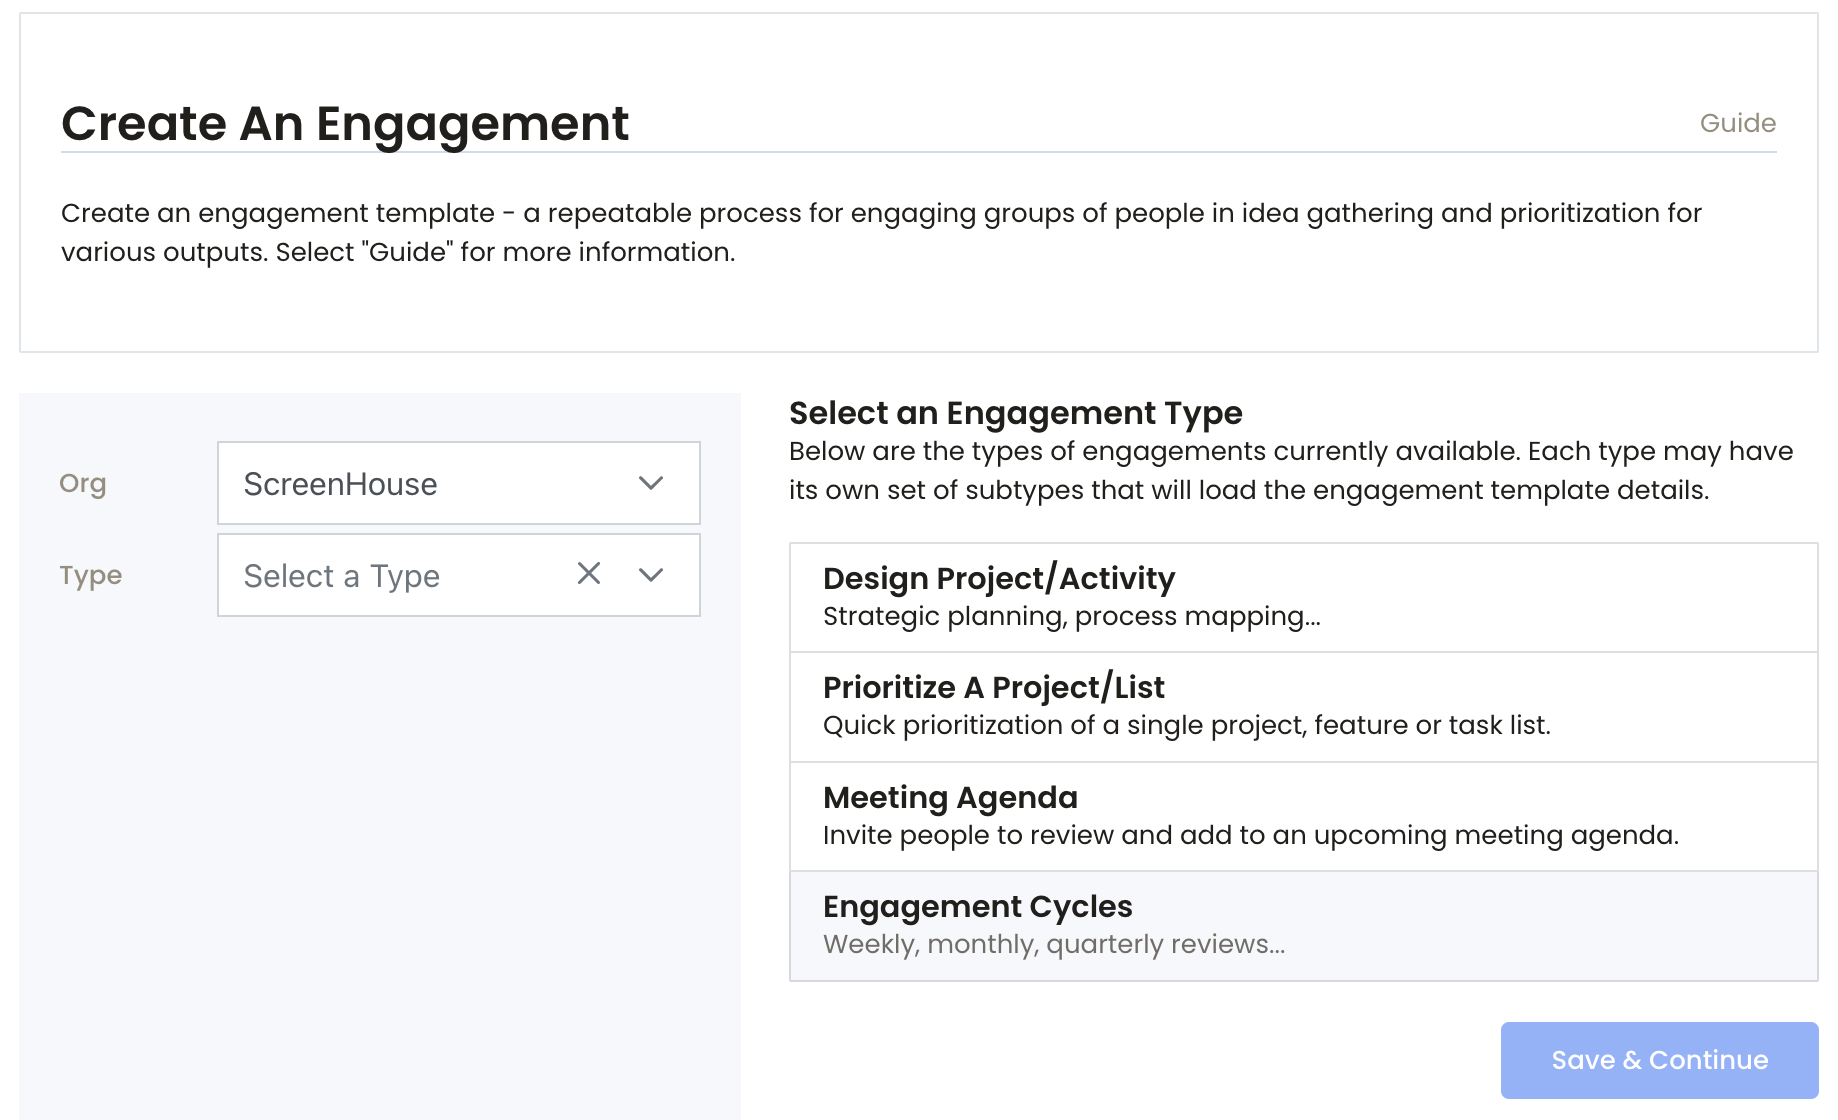 Select Engagement Process Type